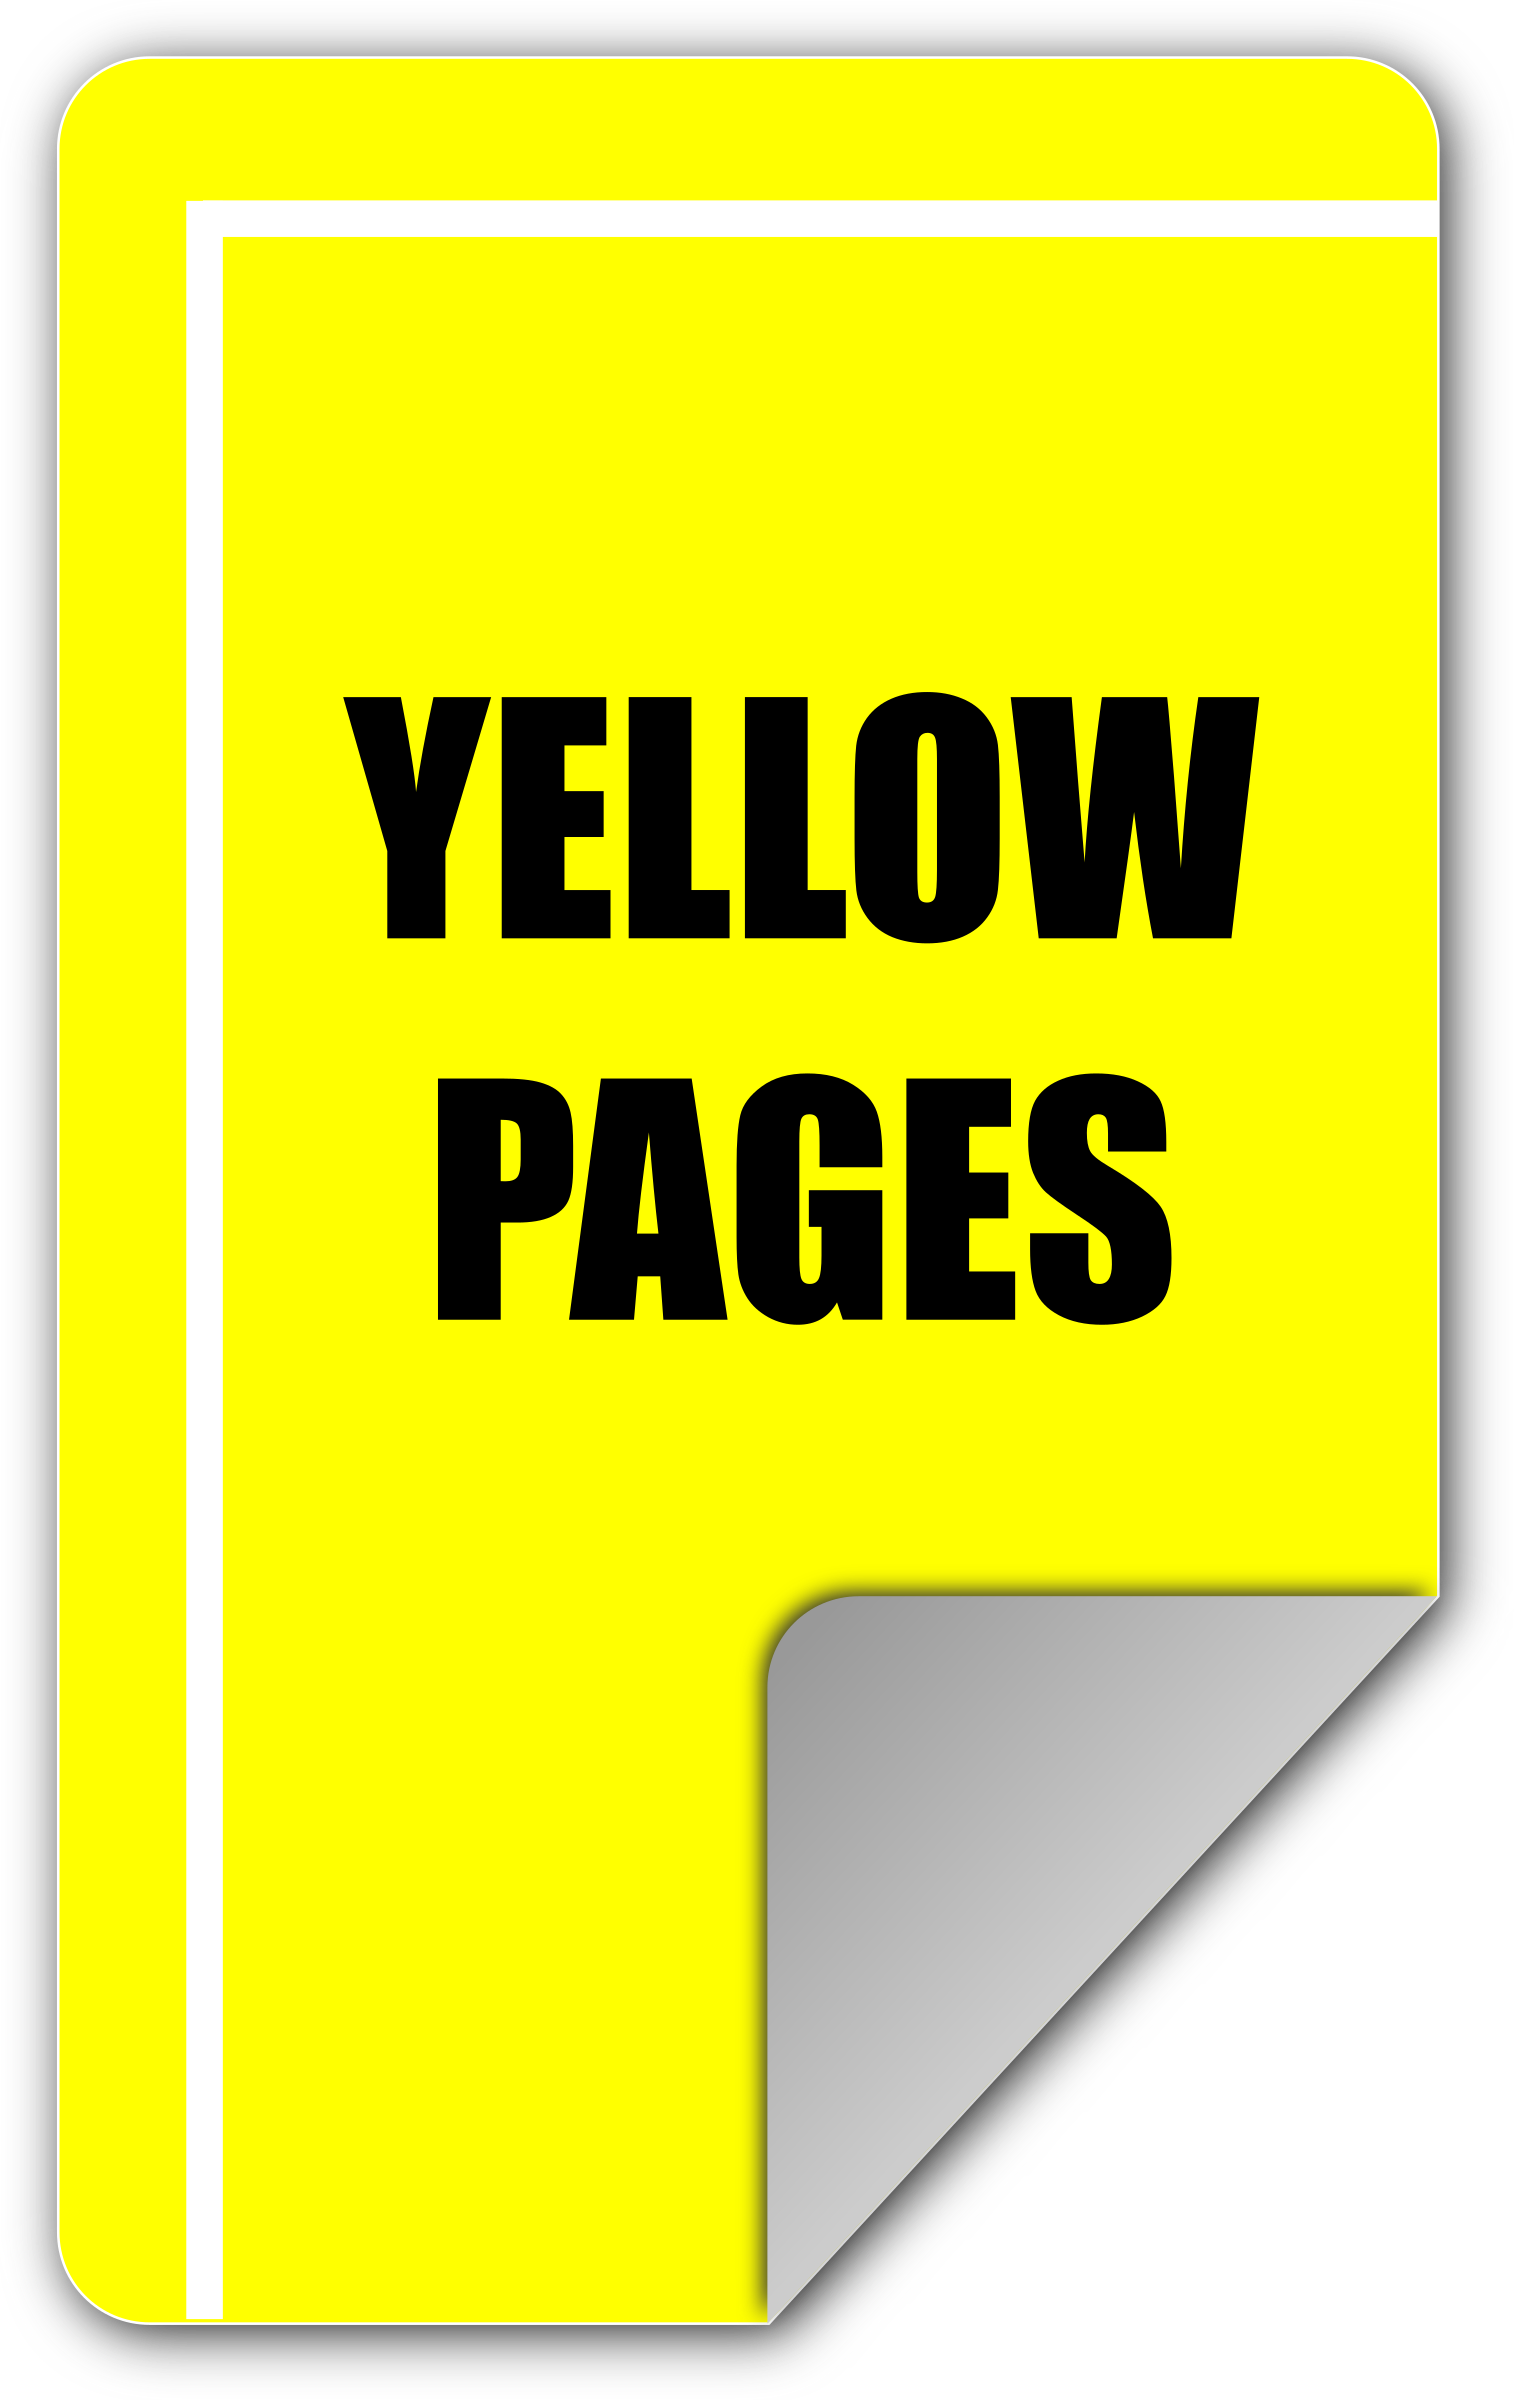 Yellow Pages Clip arts